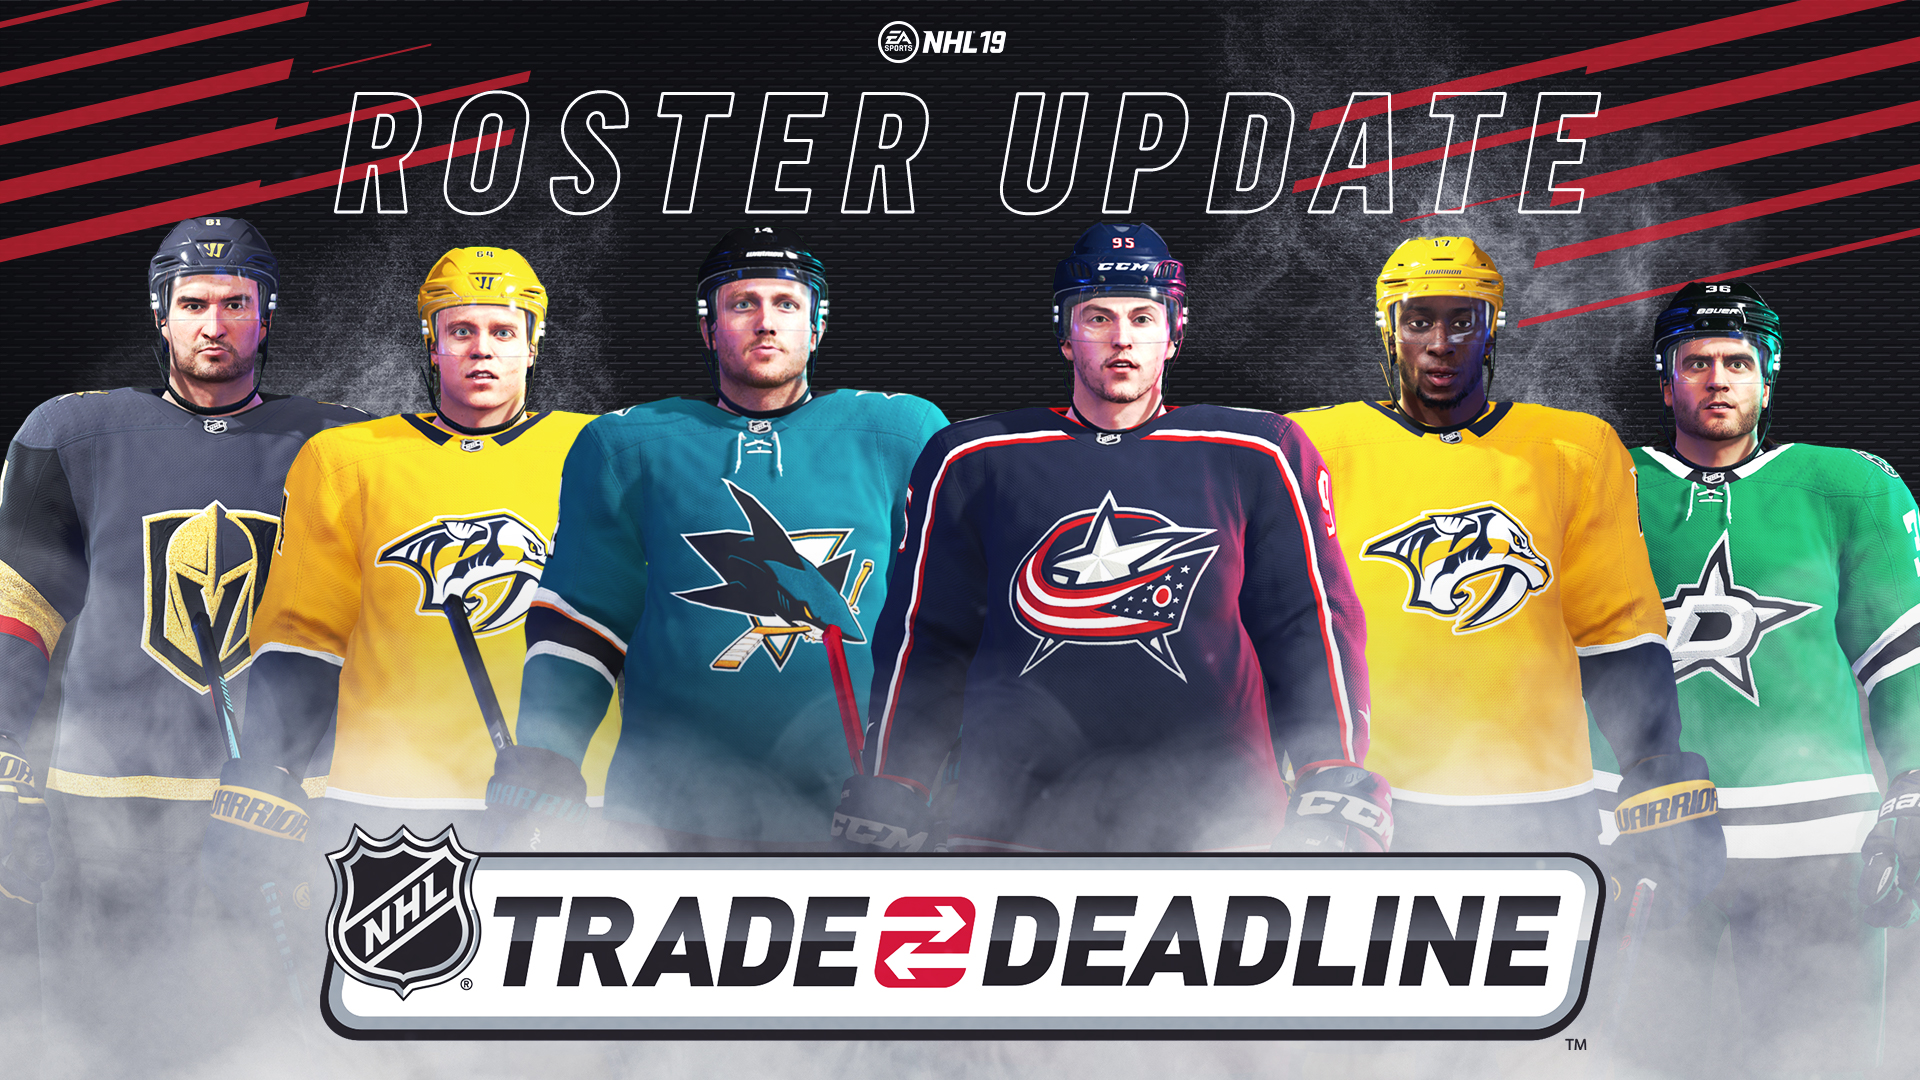 how to download current rosters on nhl 17